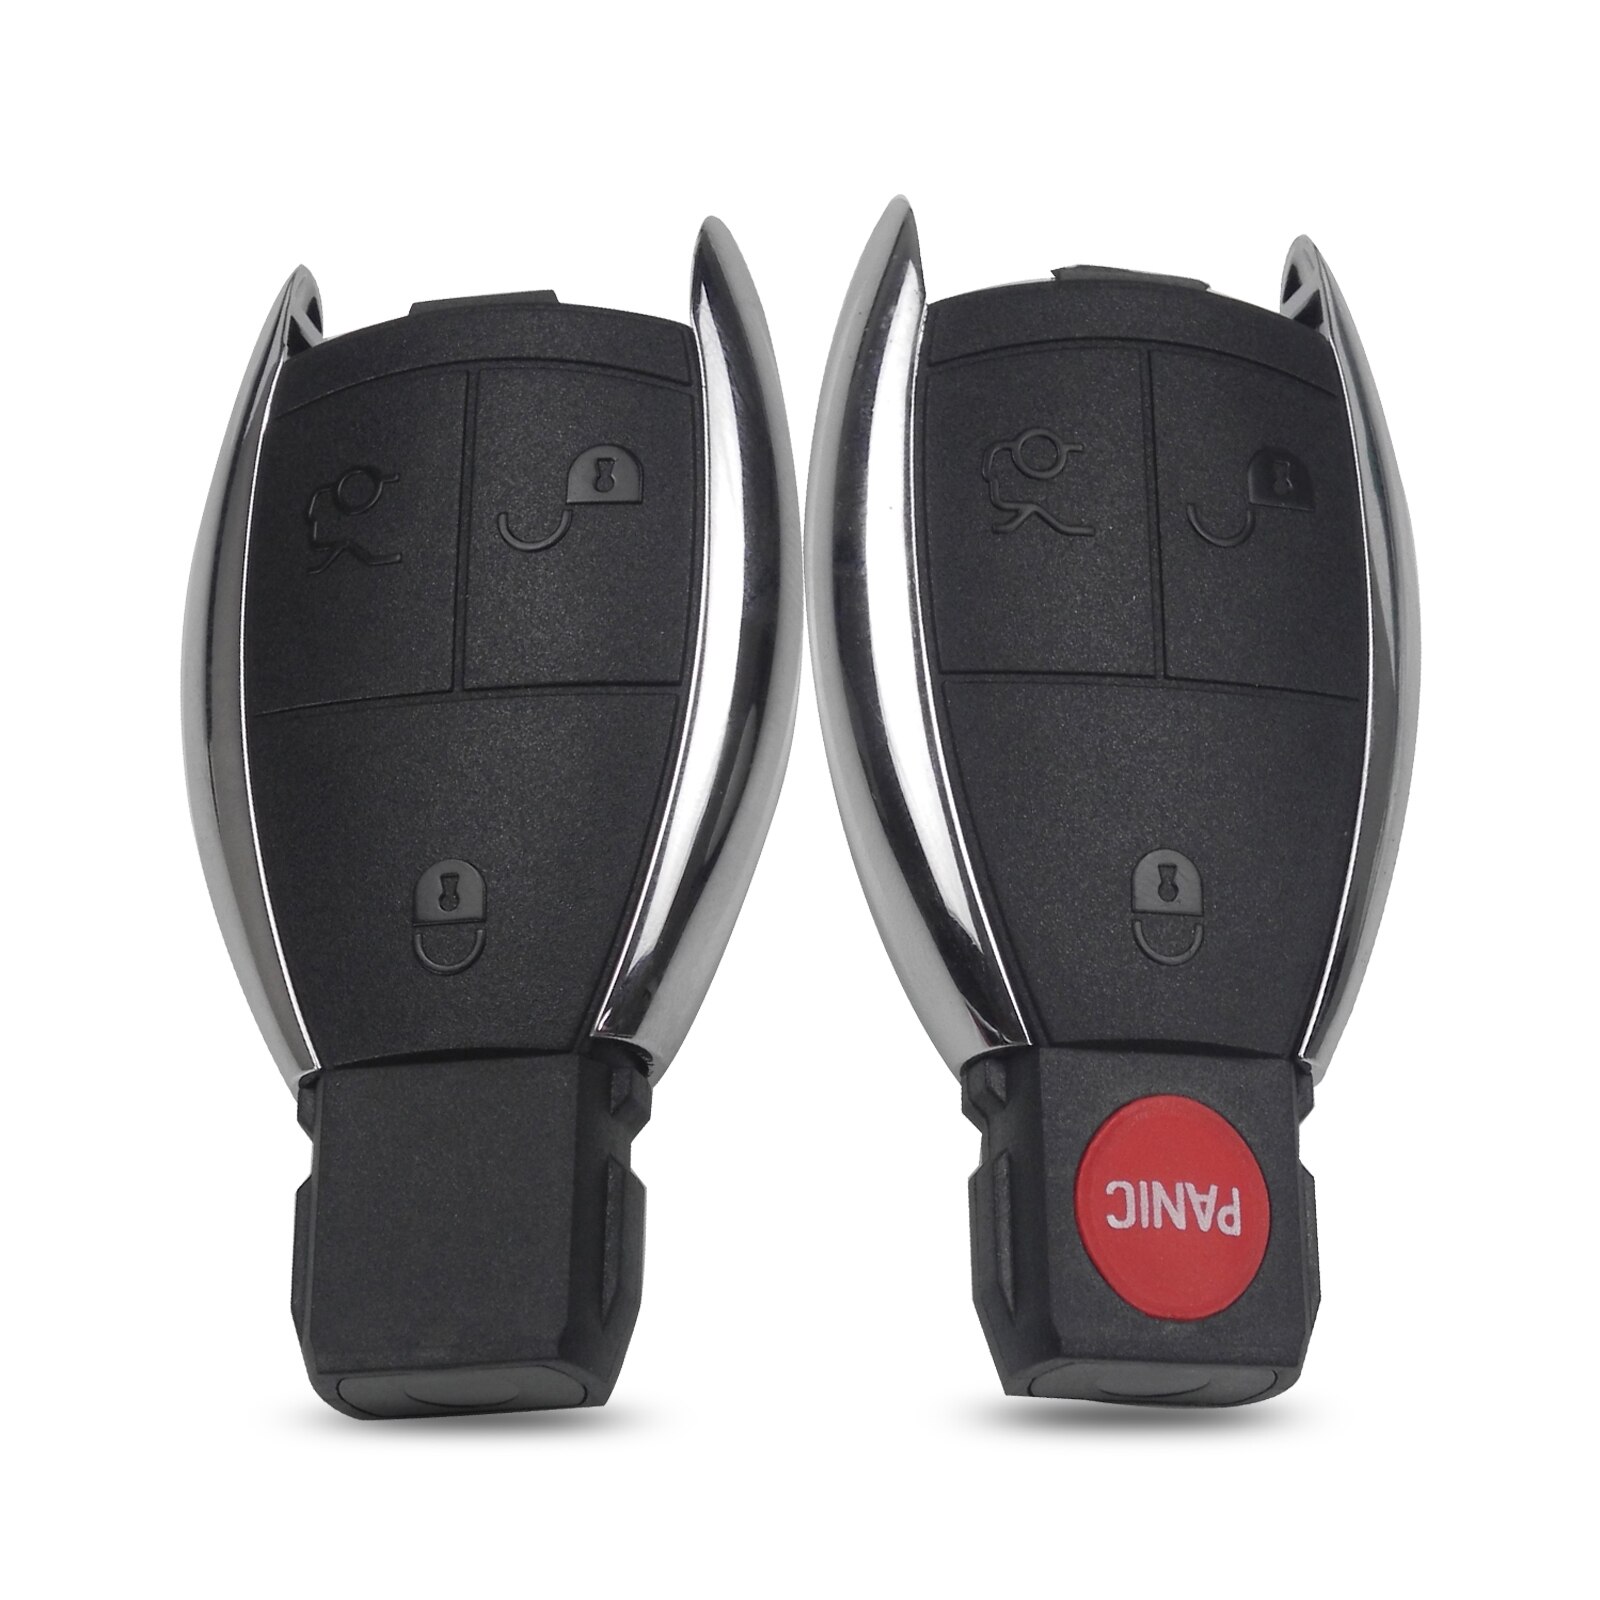 Bilchave 3/4 Knoppen Keyless Cover Auto Remote Smart Key Shell Fob Voor Mercedes Benz W203 Key Case Vervanging